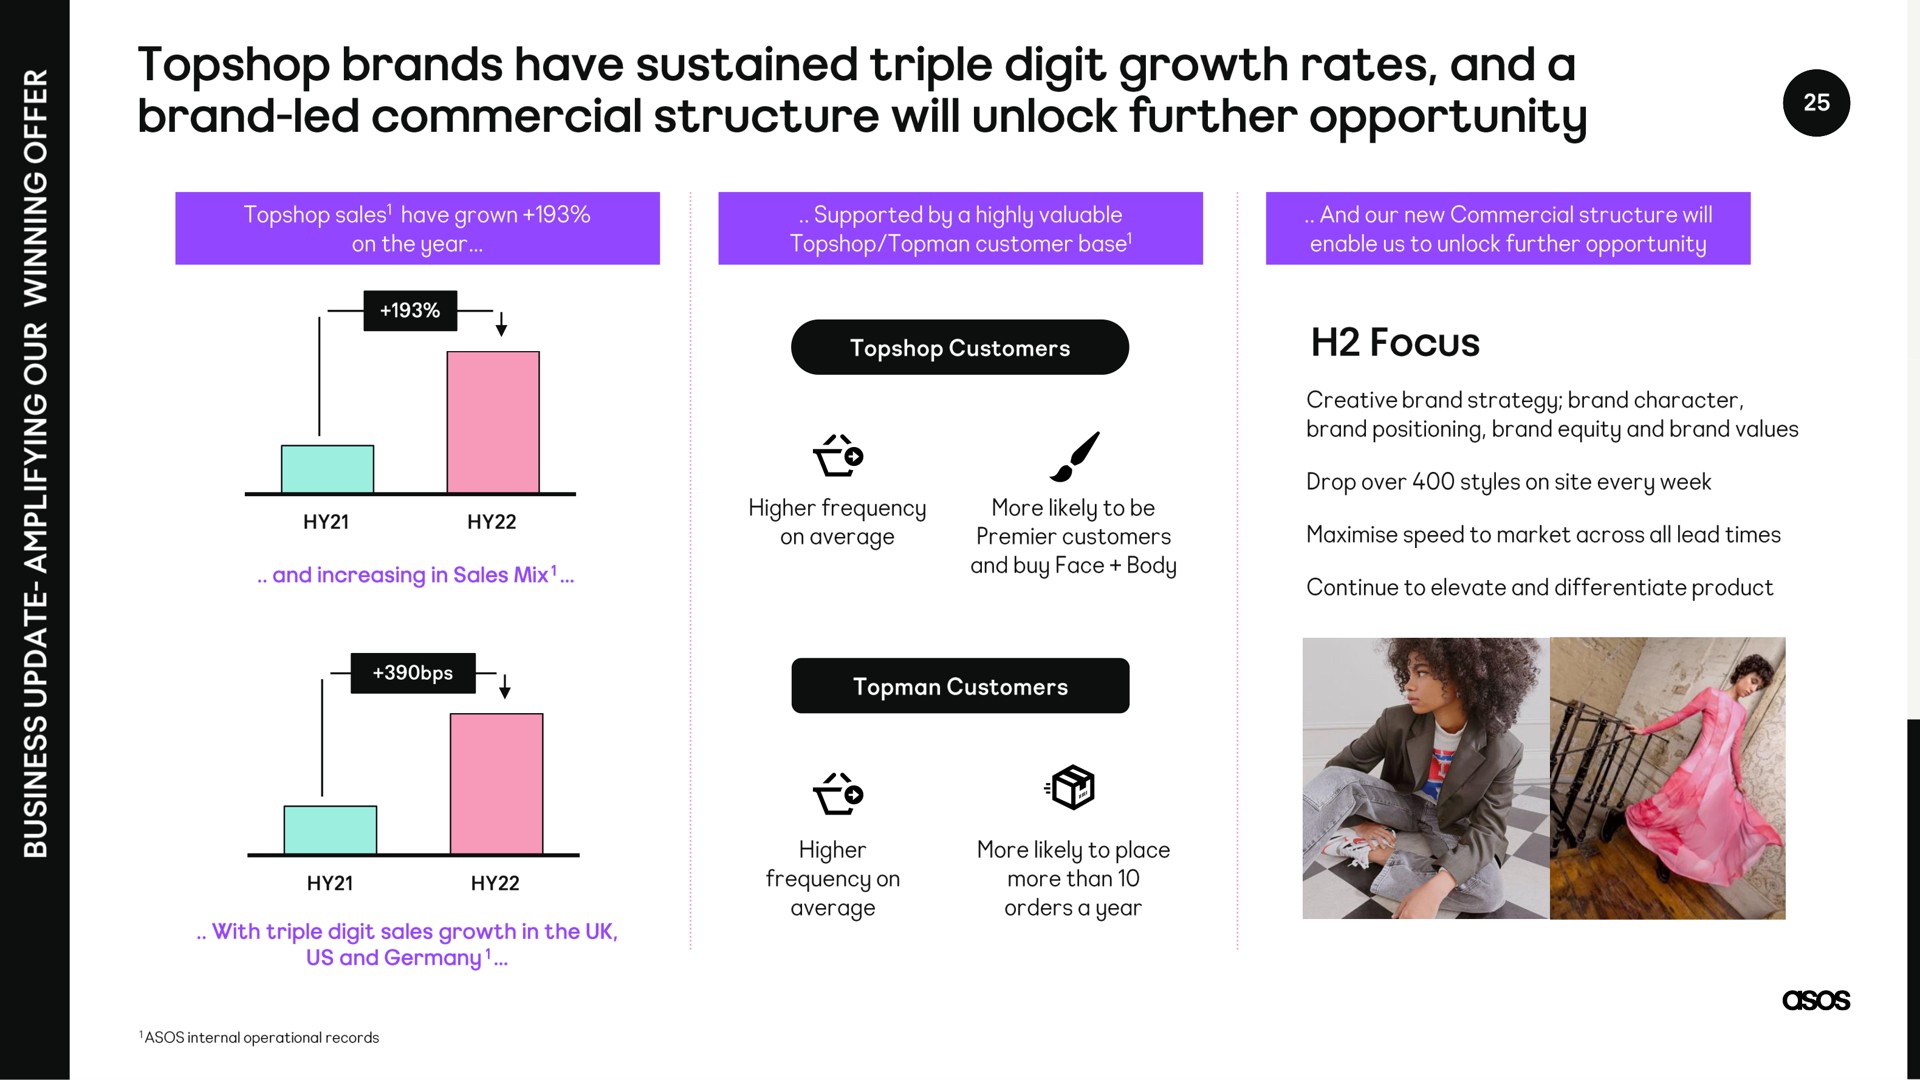 brands have sustained triple digit growth rates anda brand led commercial structure will unlock further opportunity | Asos